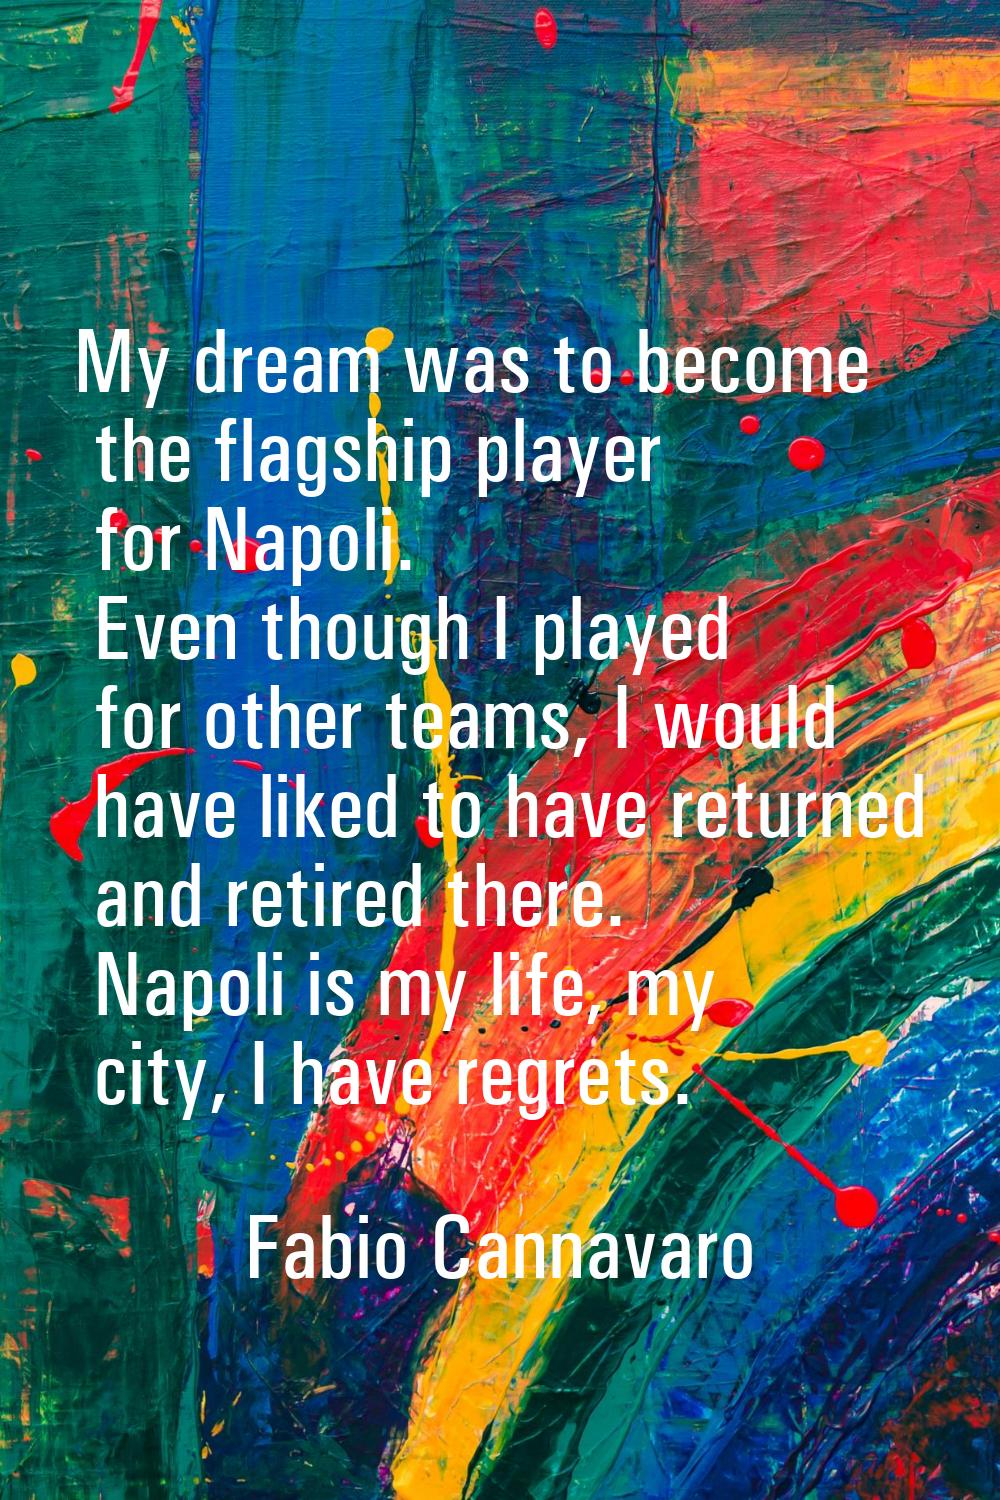 My dream was to become the flagship player for Napoli. Even though I played for other teams, I woul